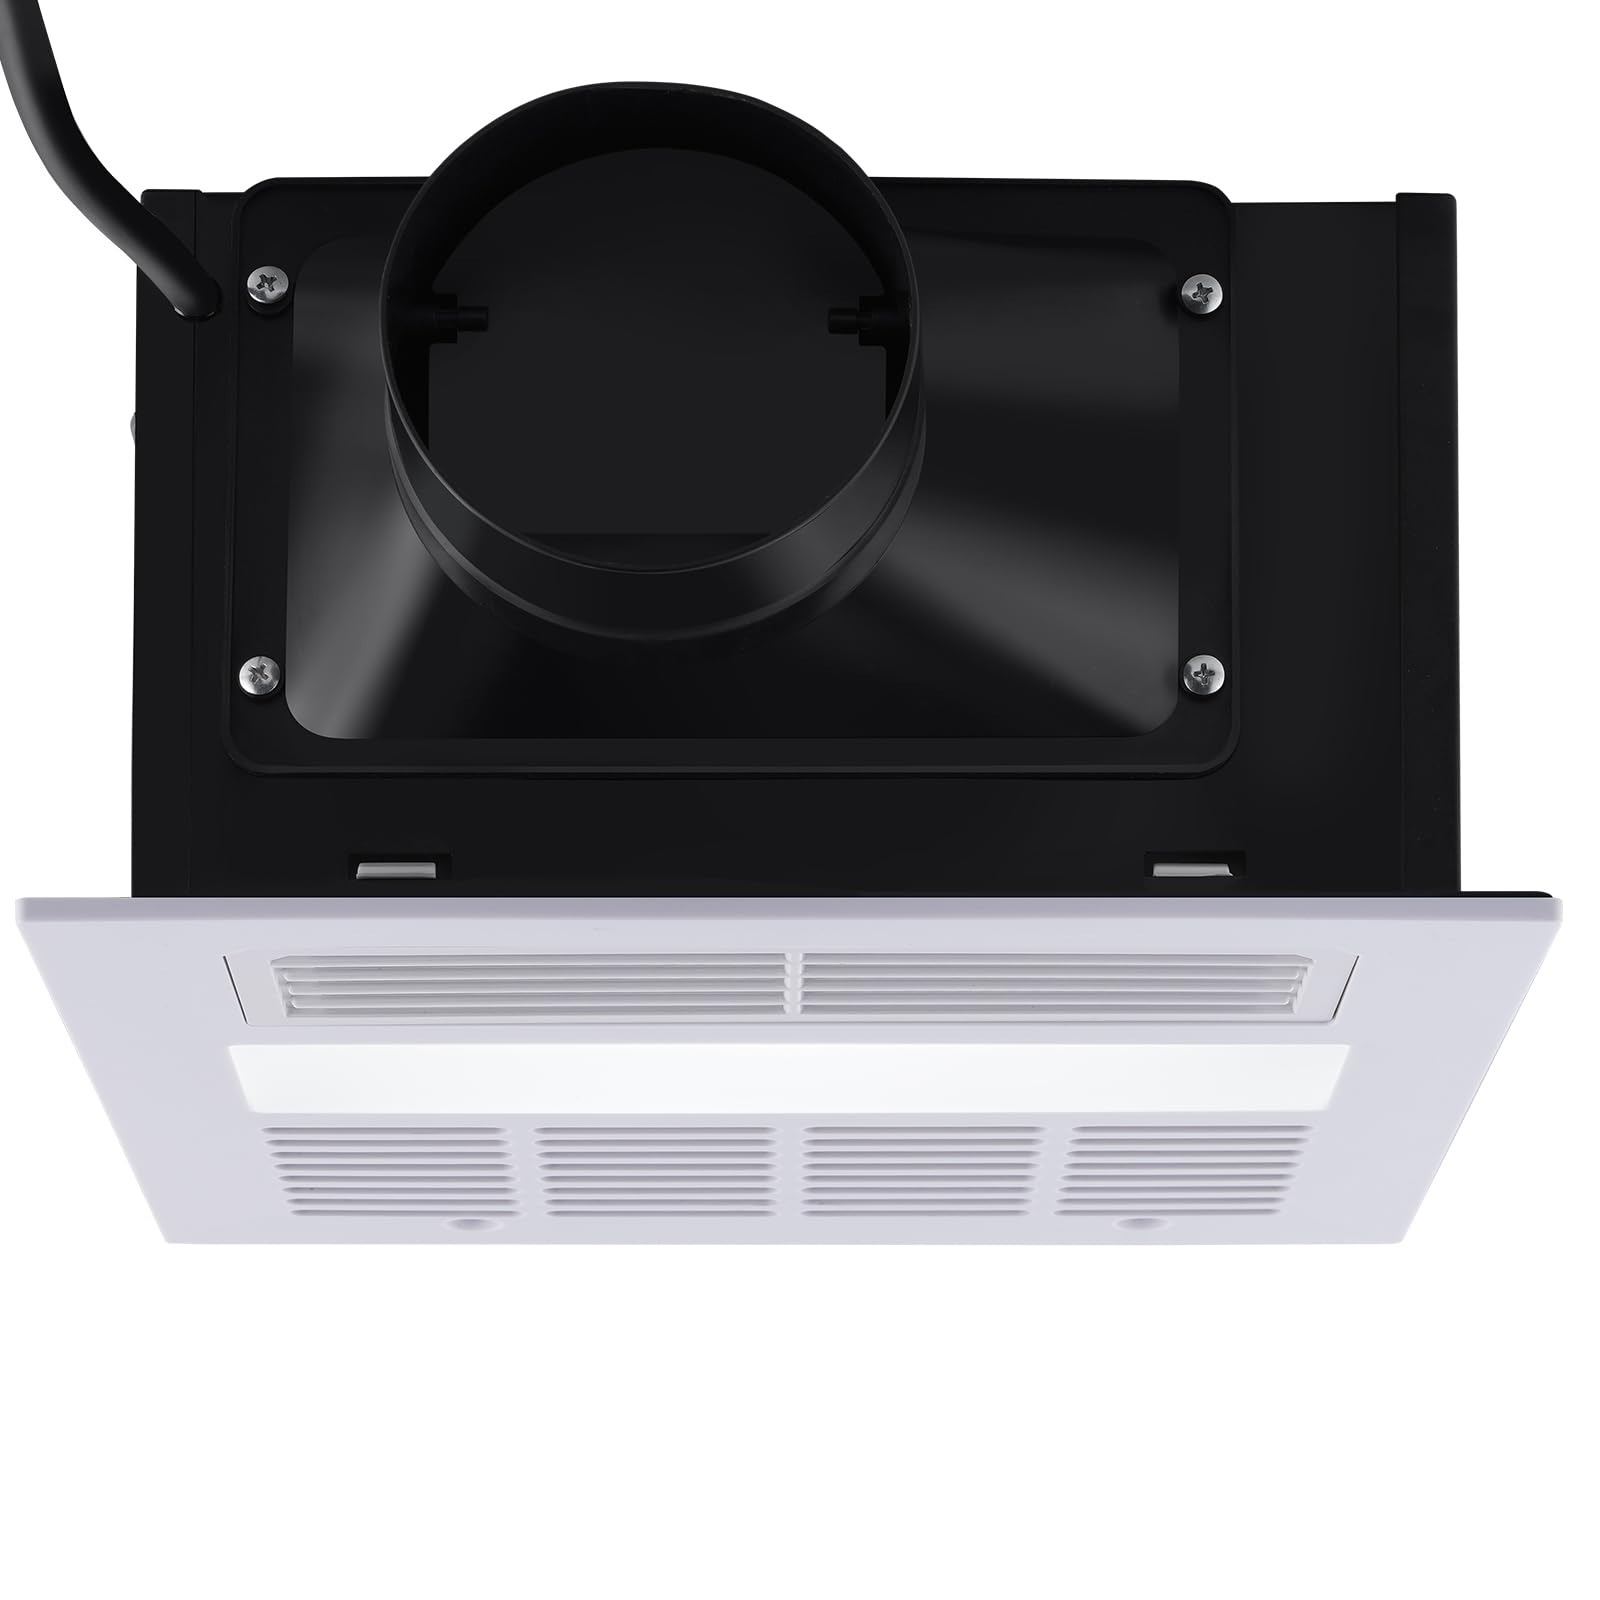 VEVOR Bathroom Exhaust Fan, 1500W Heating, 110 CFM High-Efficiency Ventilation, 1.5sones Low Noise Operation, Energy-Saving Bathroom Ceiling Fan, No Need For Attic Access, For Various Ceilings